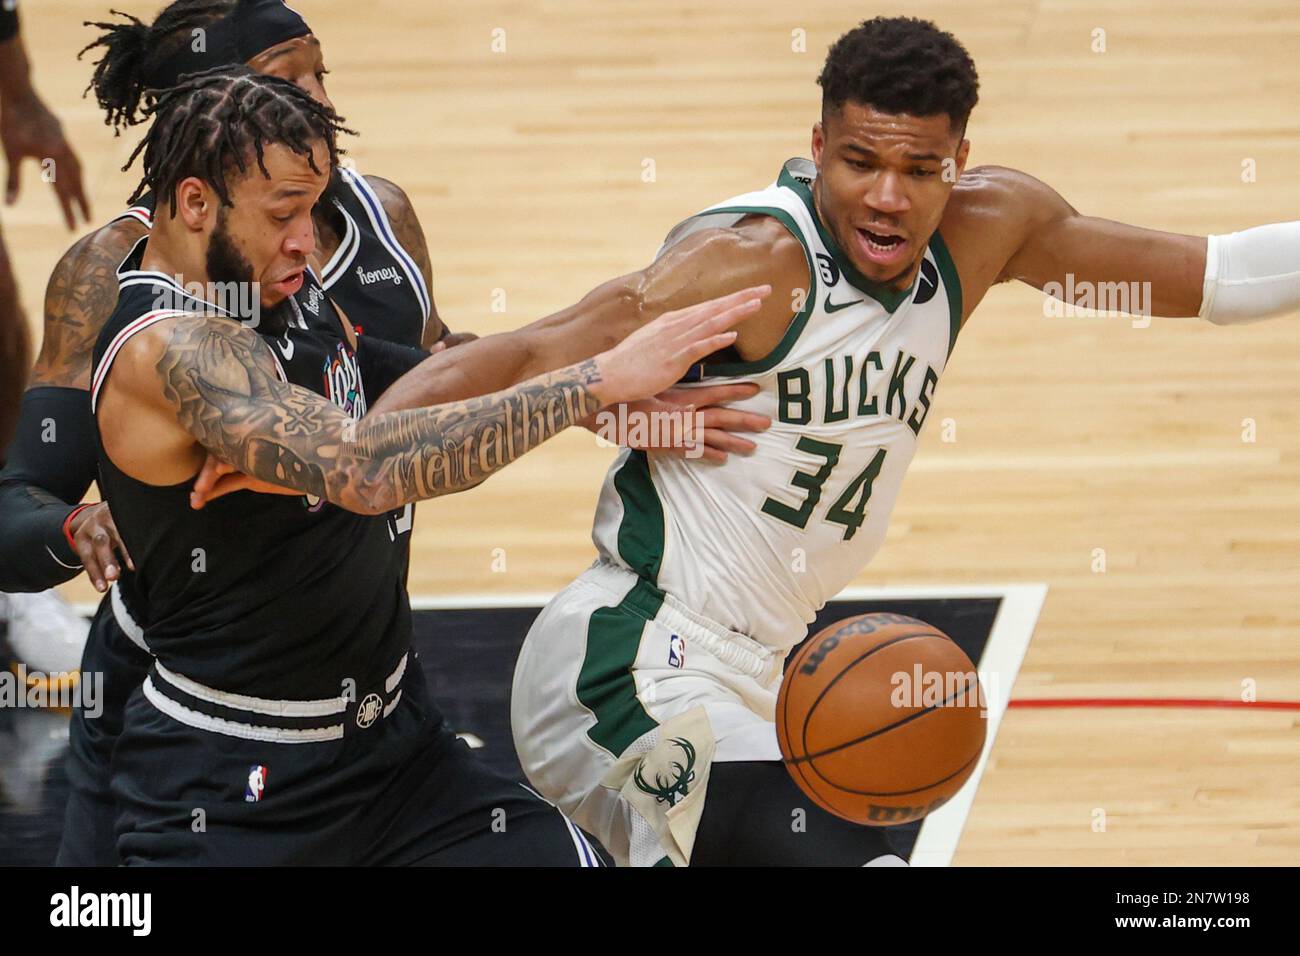 Los Angeles, United States. 10th Feb, 2023. Milwaukee Bucks forward Giannis  Antetokounmpo (L) seen in action against Los Angeles Clippers forward Robert  Covington (R) during an NBA basketball game in Los Angeles. (